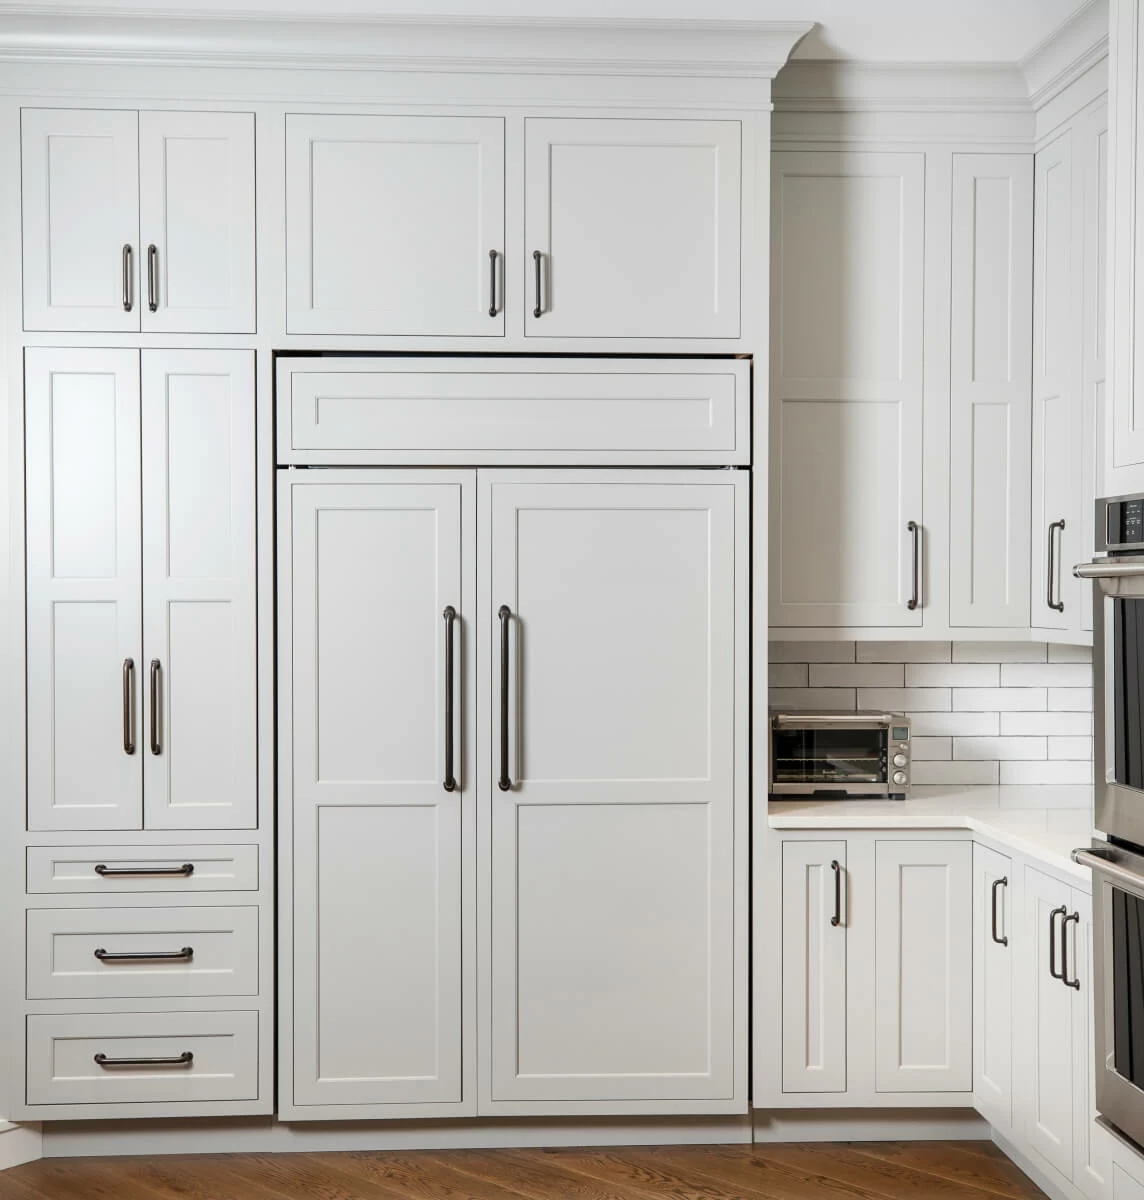 White painted kitchen cabinets and cabinet appliance panels that hide the refrigerator in plain sight.